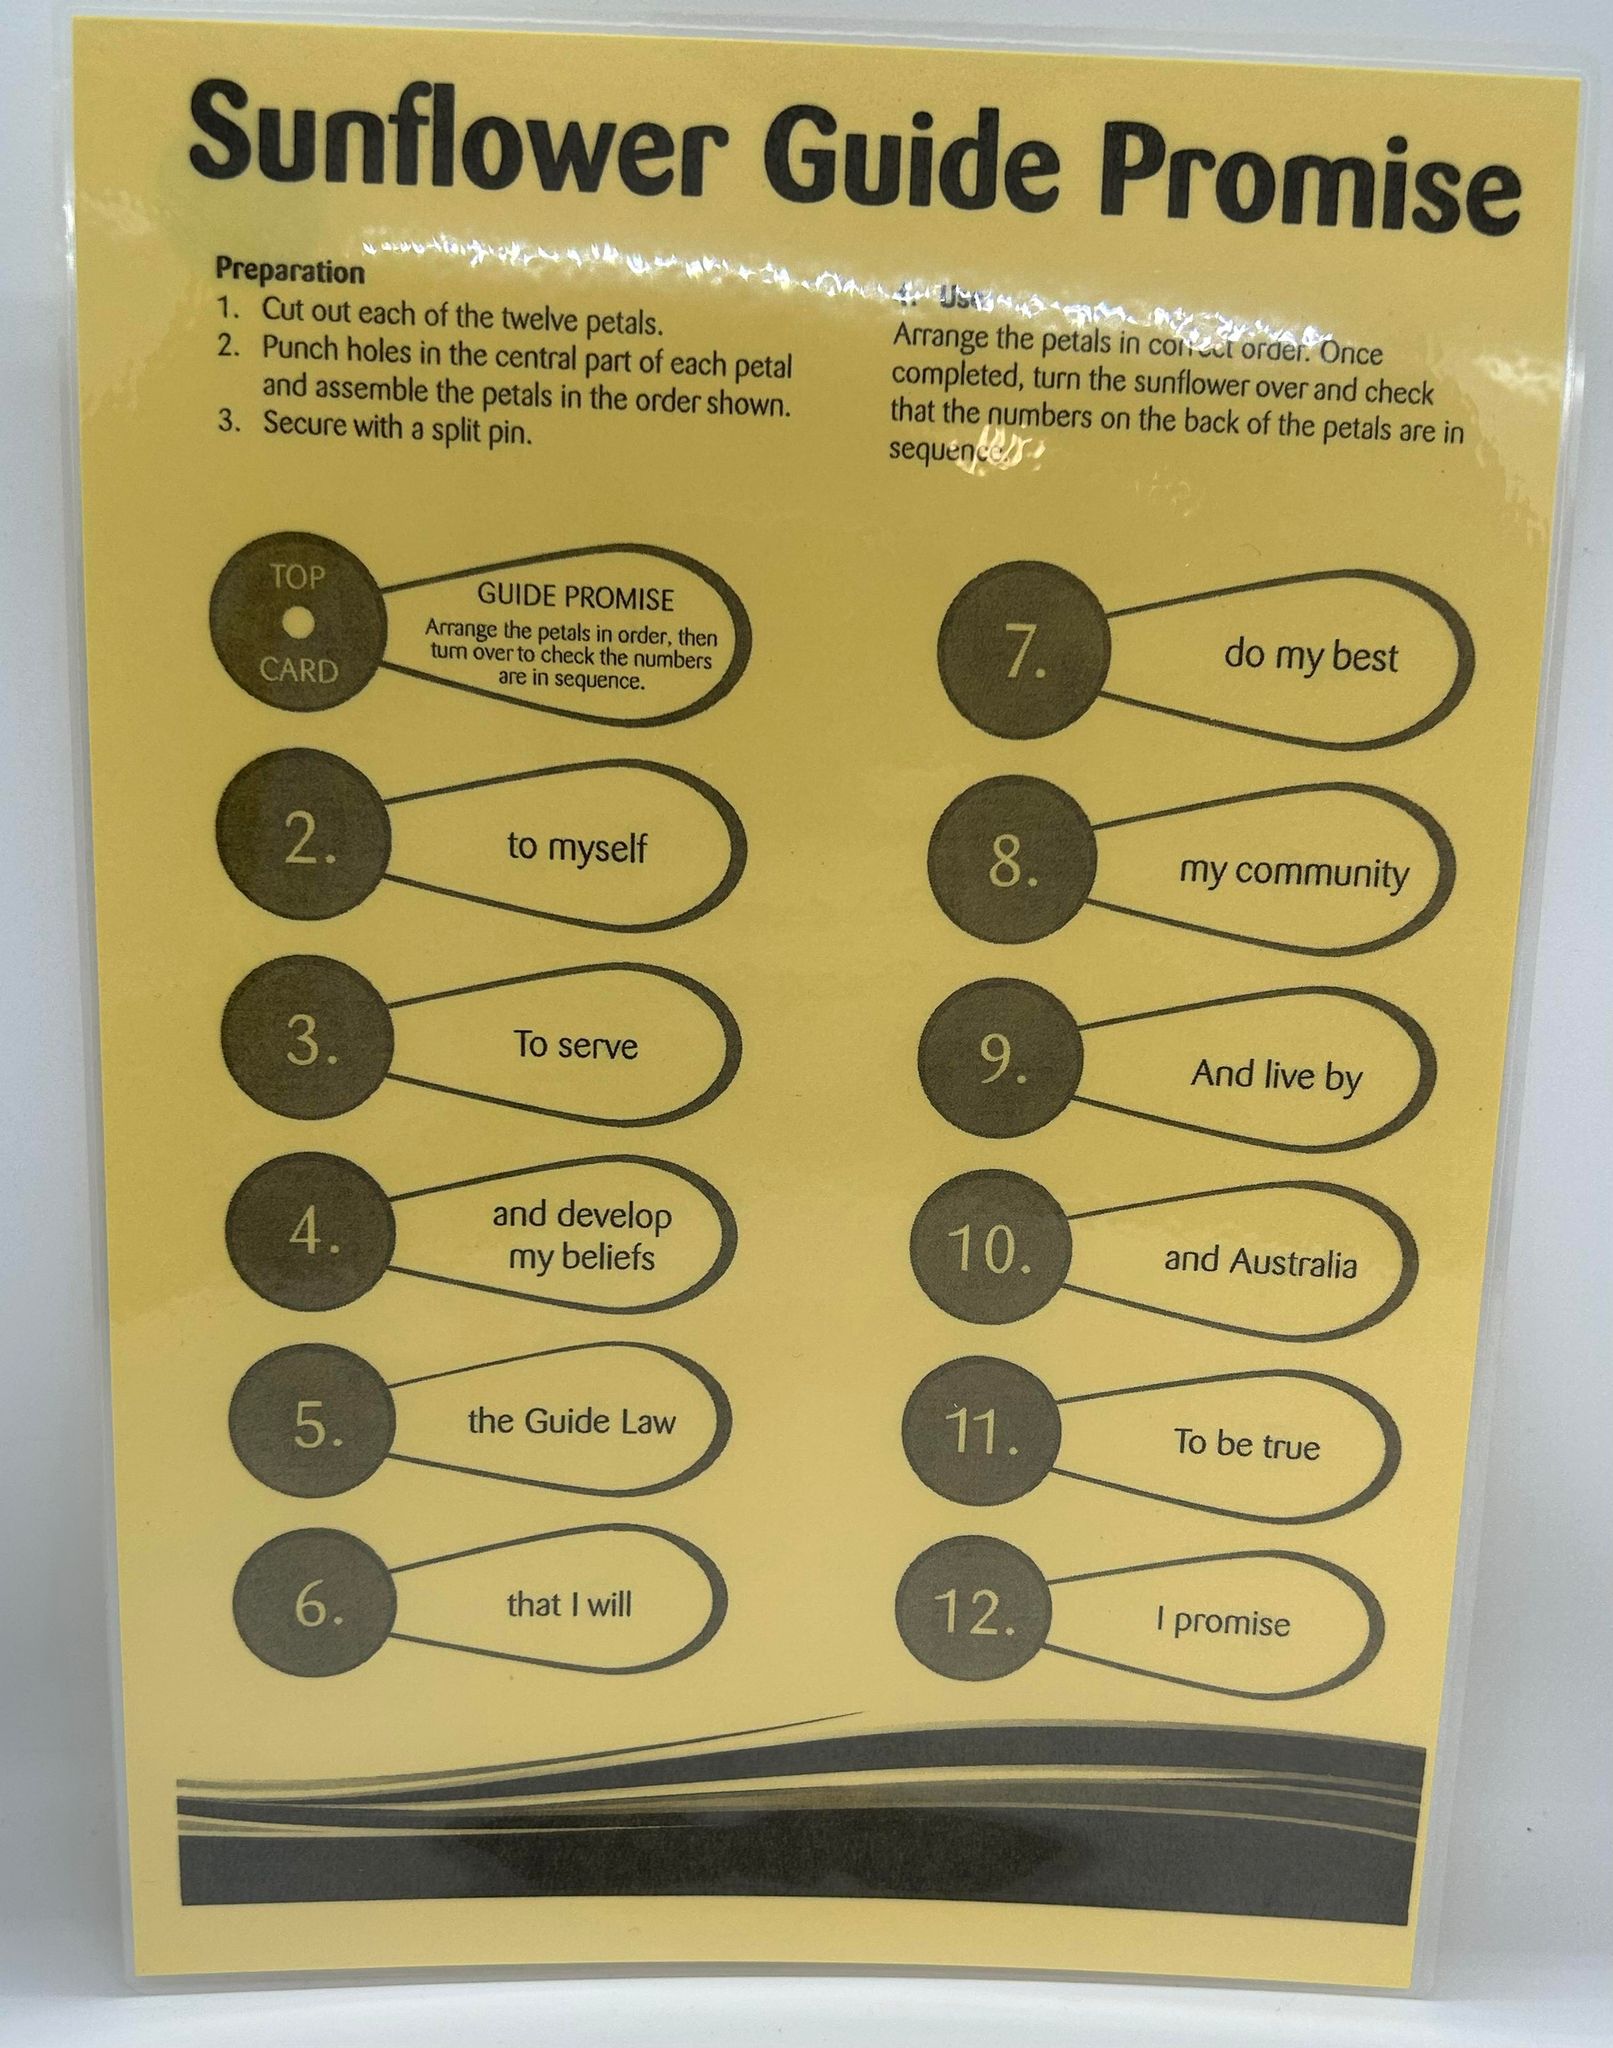 a paper based guide promise activity